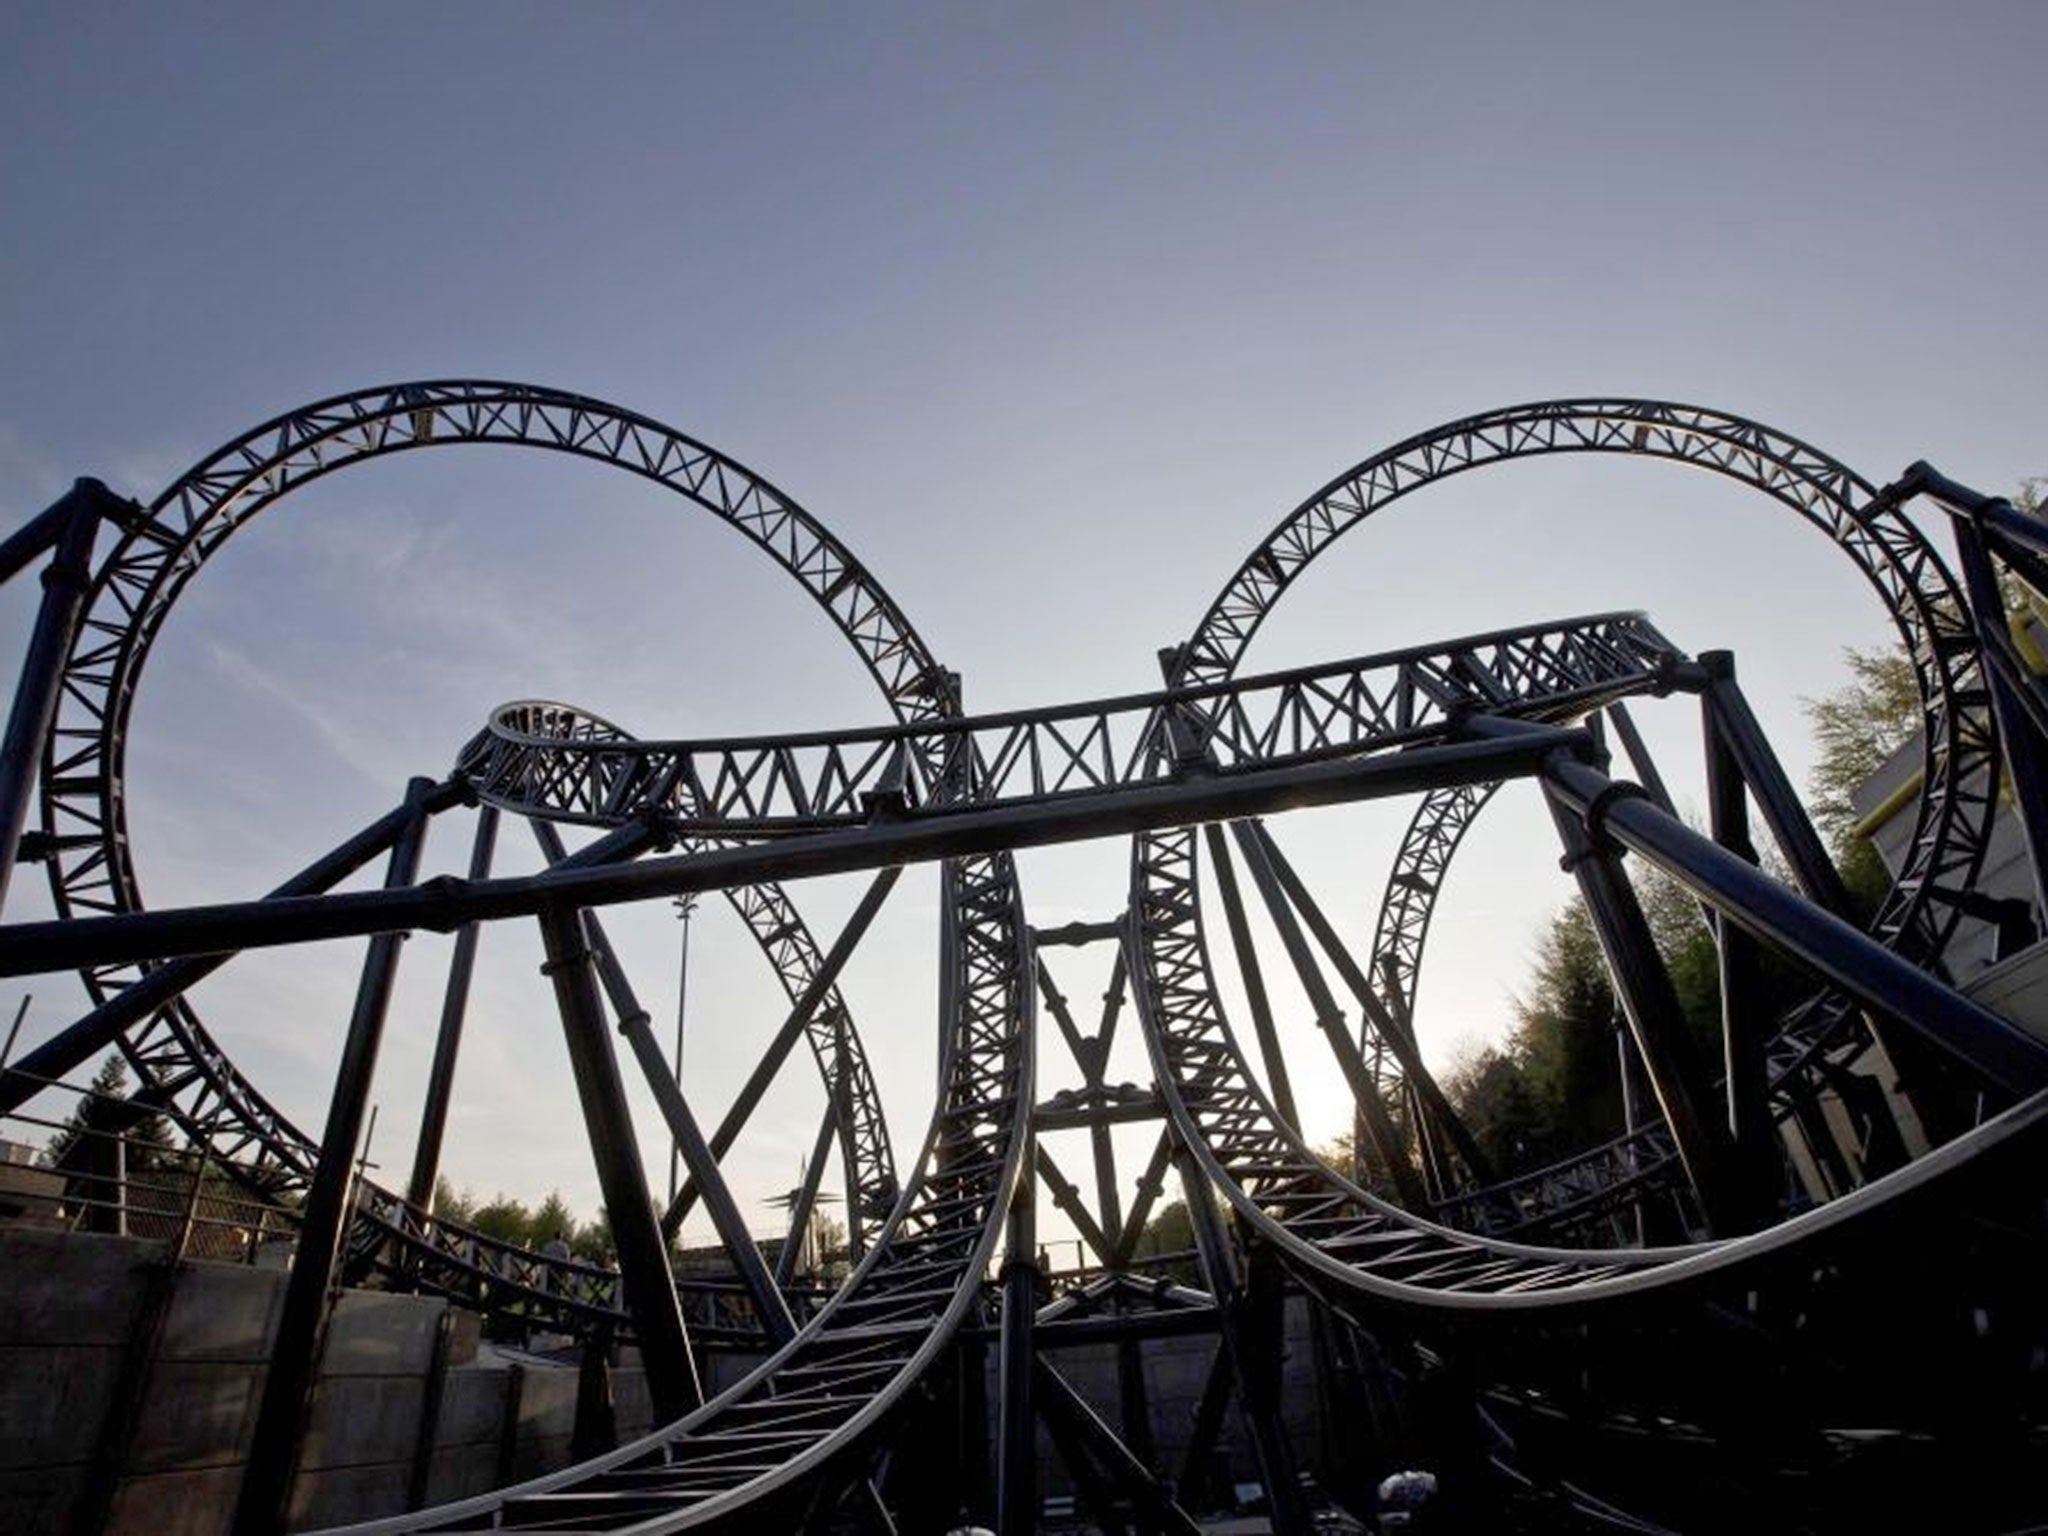 The Smiler ride at Alton Towers Resort in Staffordshire, which is to re-open "within the next few days" but the ride involved in the crash in which 16 people were injured will remain shut for the foreseeable future, the company which runs the park has ann